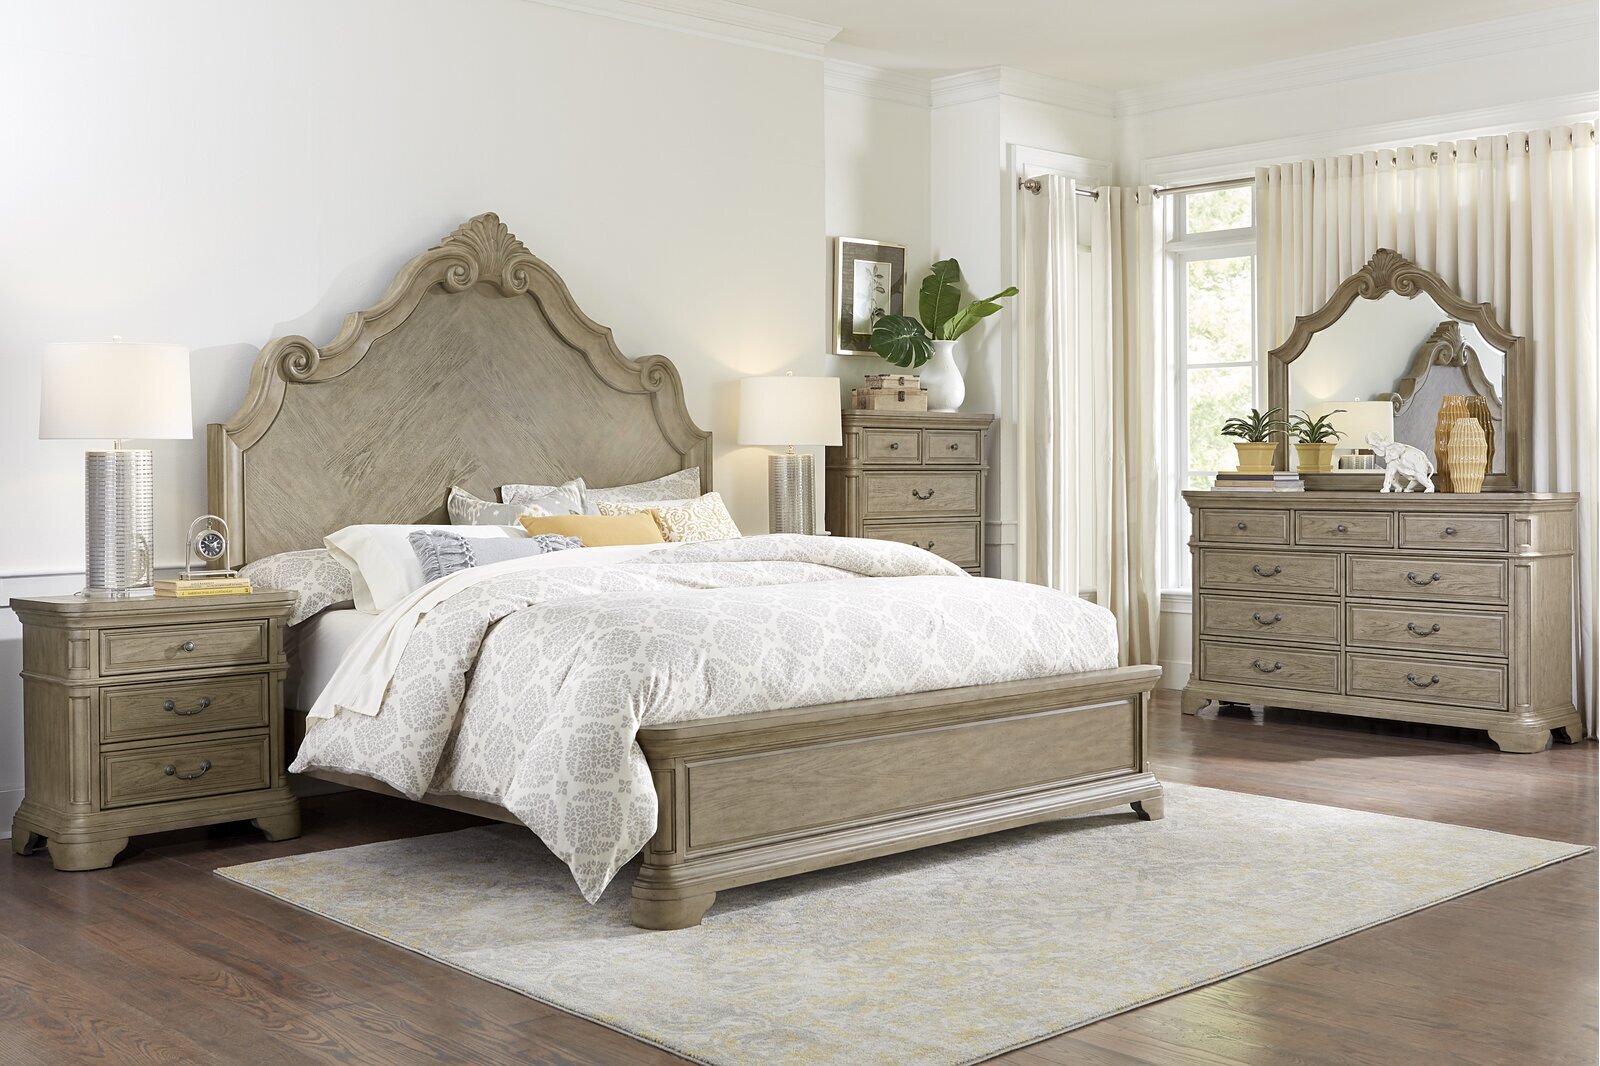 Grand French country bedroom set in a rustic hue